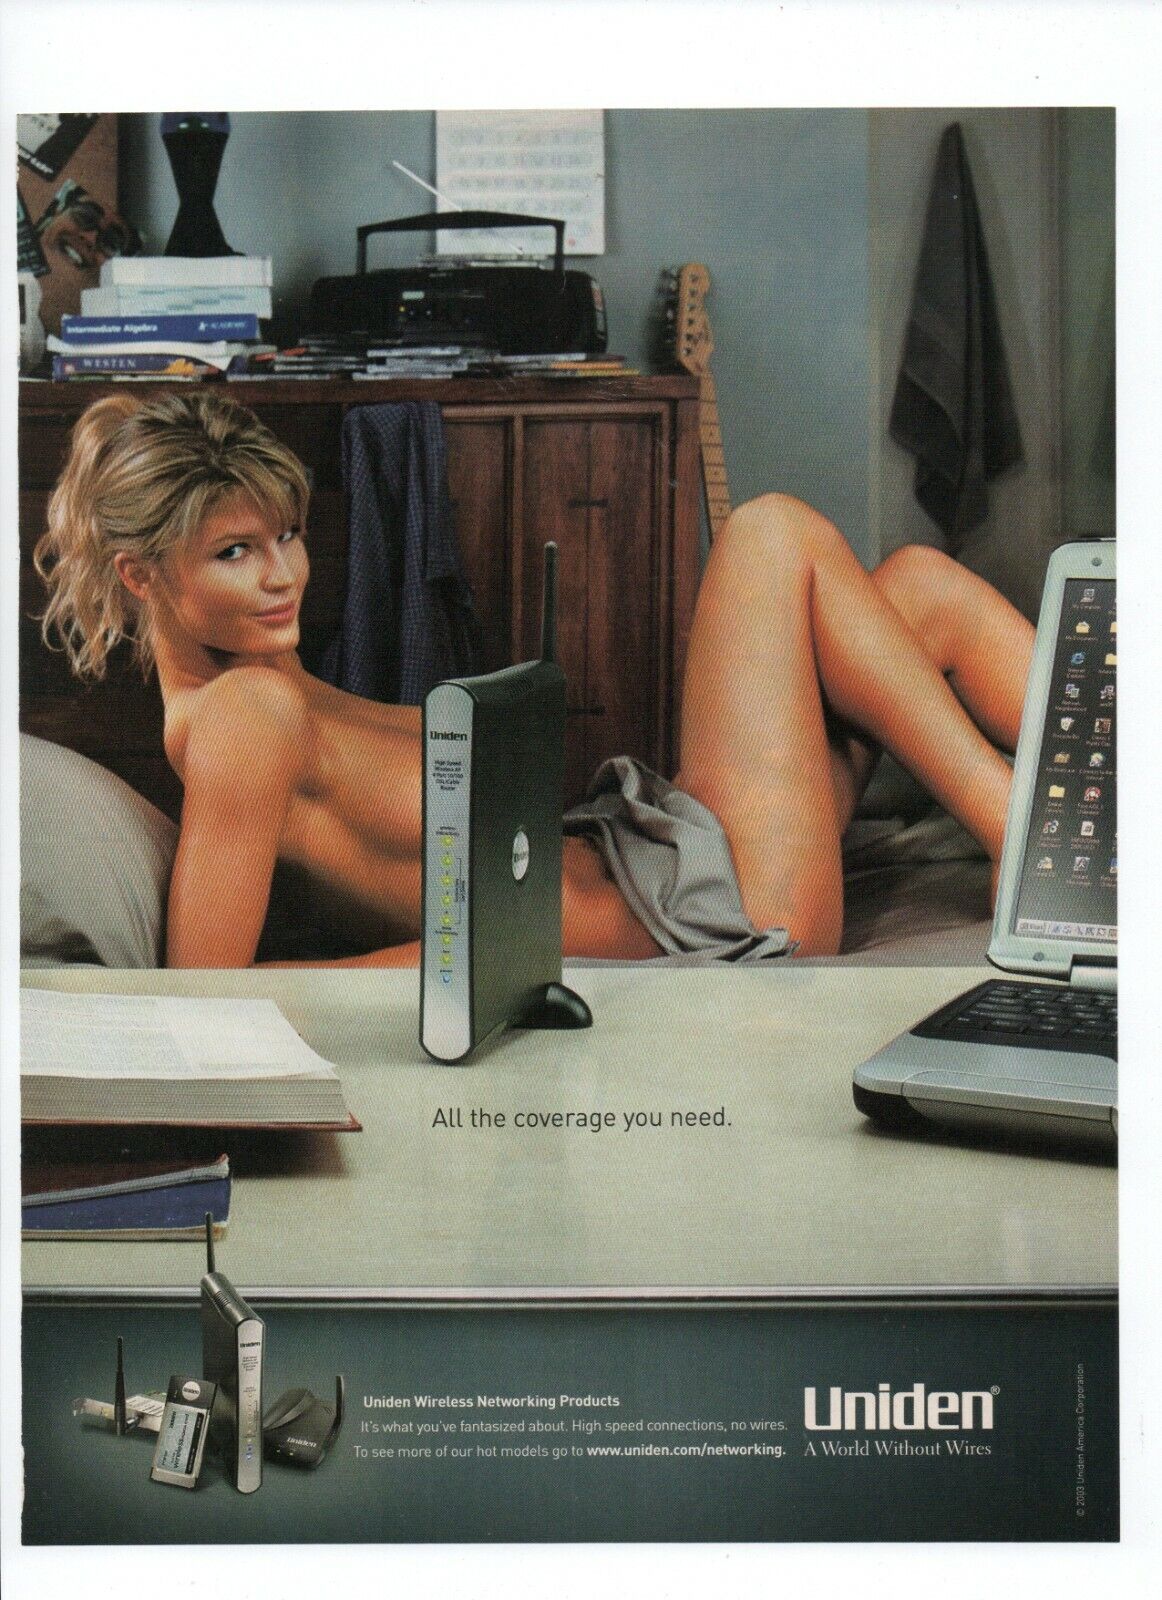 Uniden Wireless All The Coverage You Need Naked Women 2003 Video Game PRINT AD